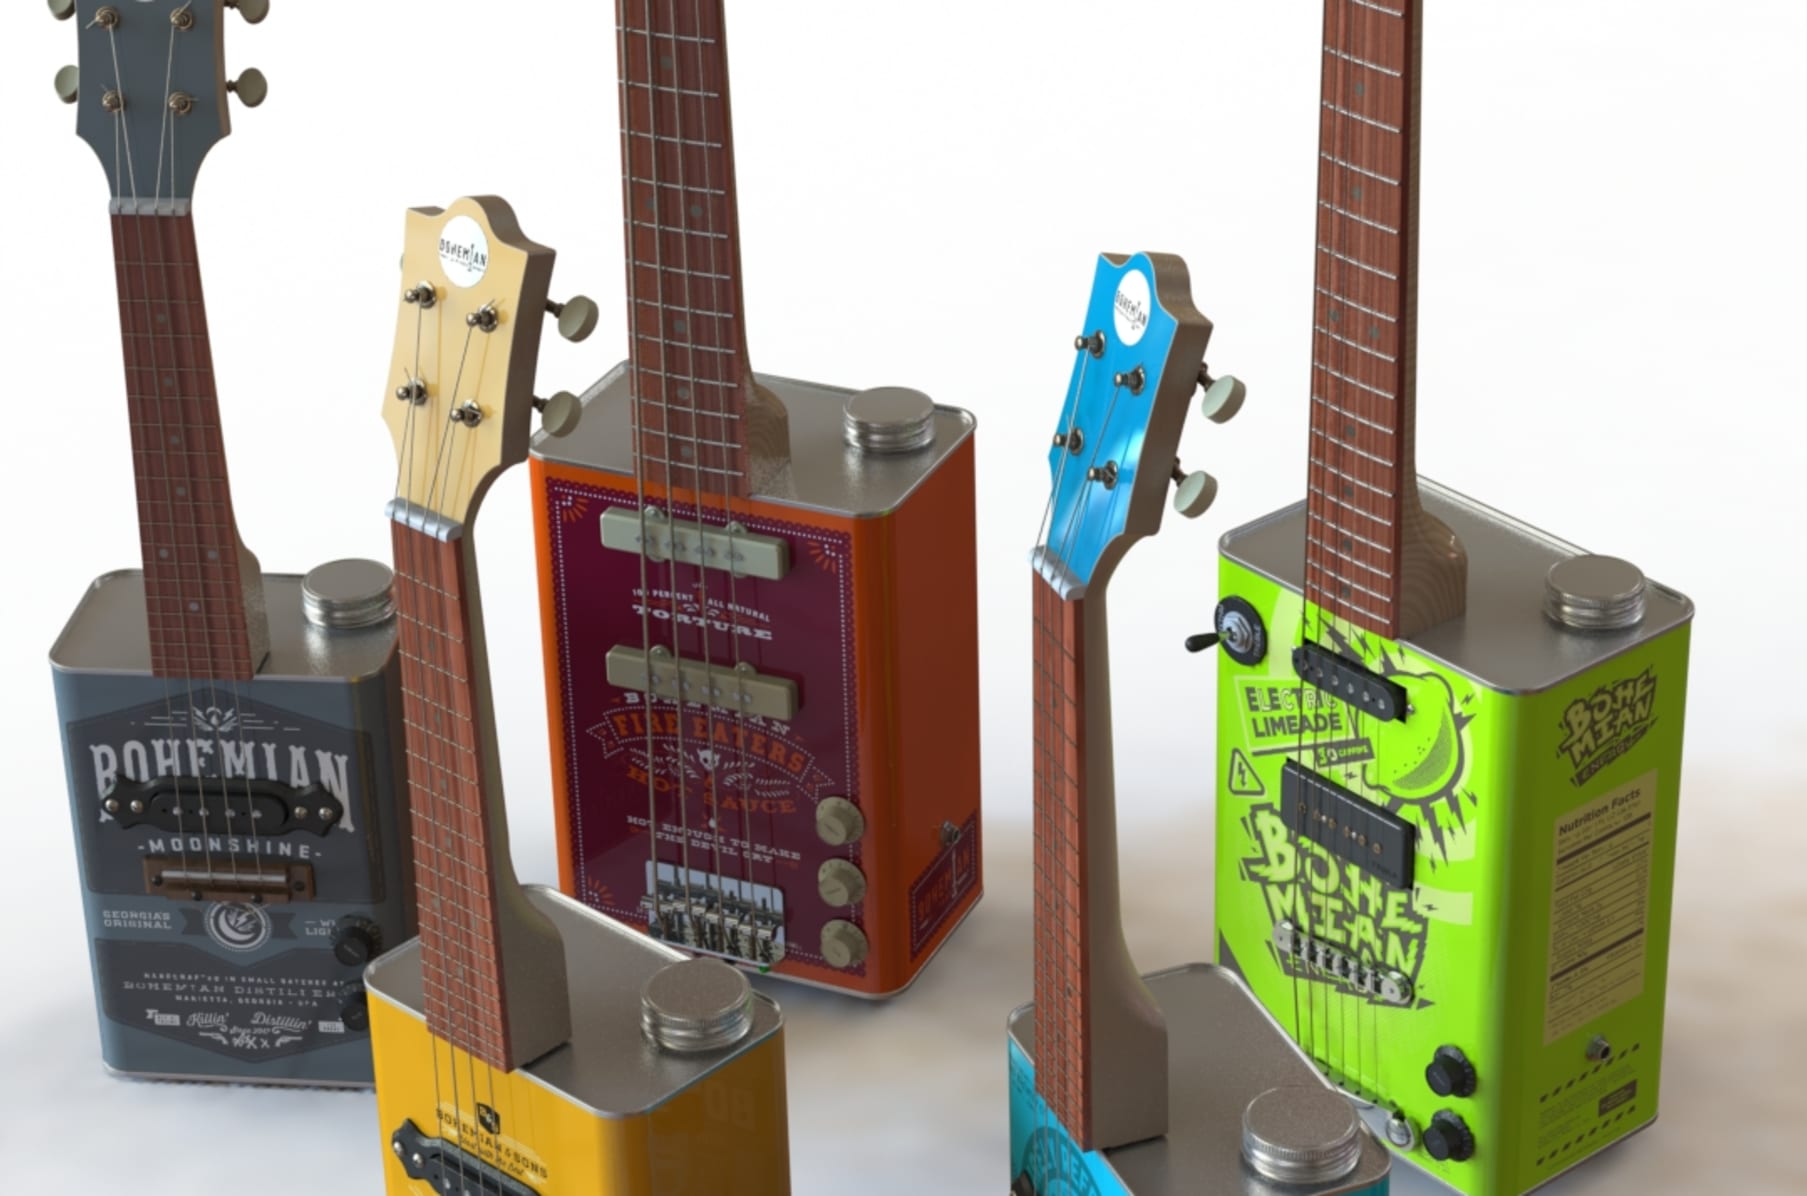 Bohemian equips its oil-can guitars, basses and ukuleles with new